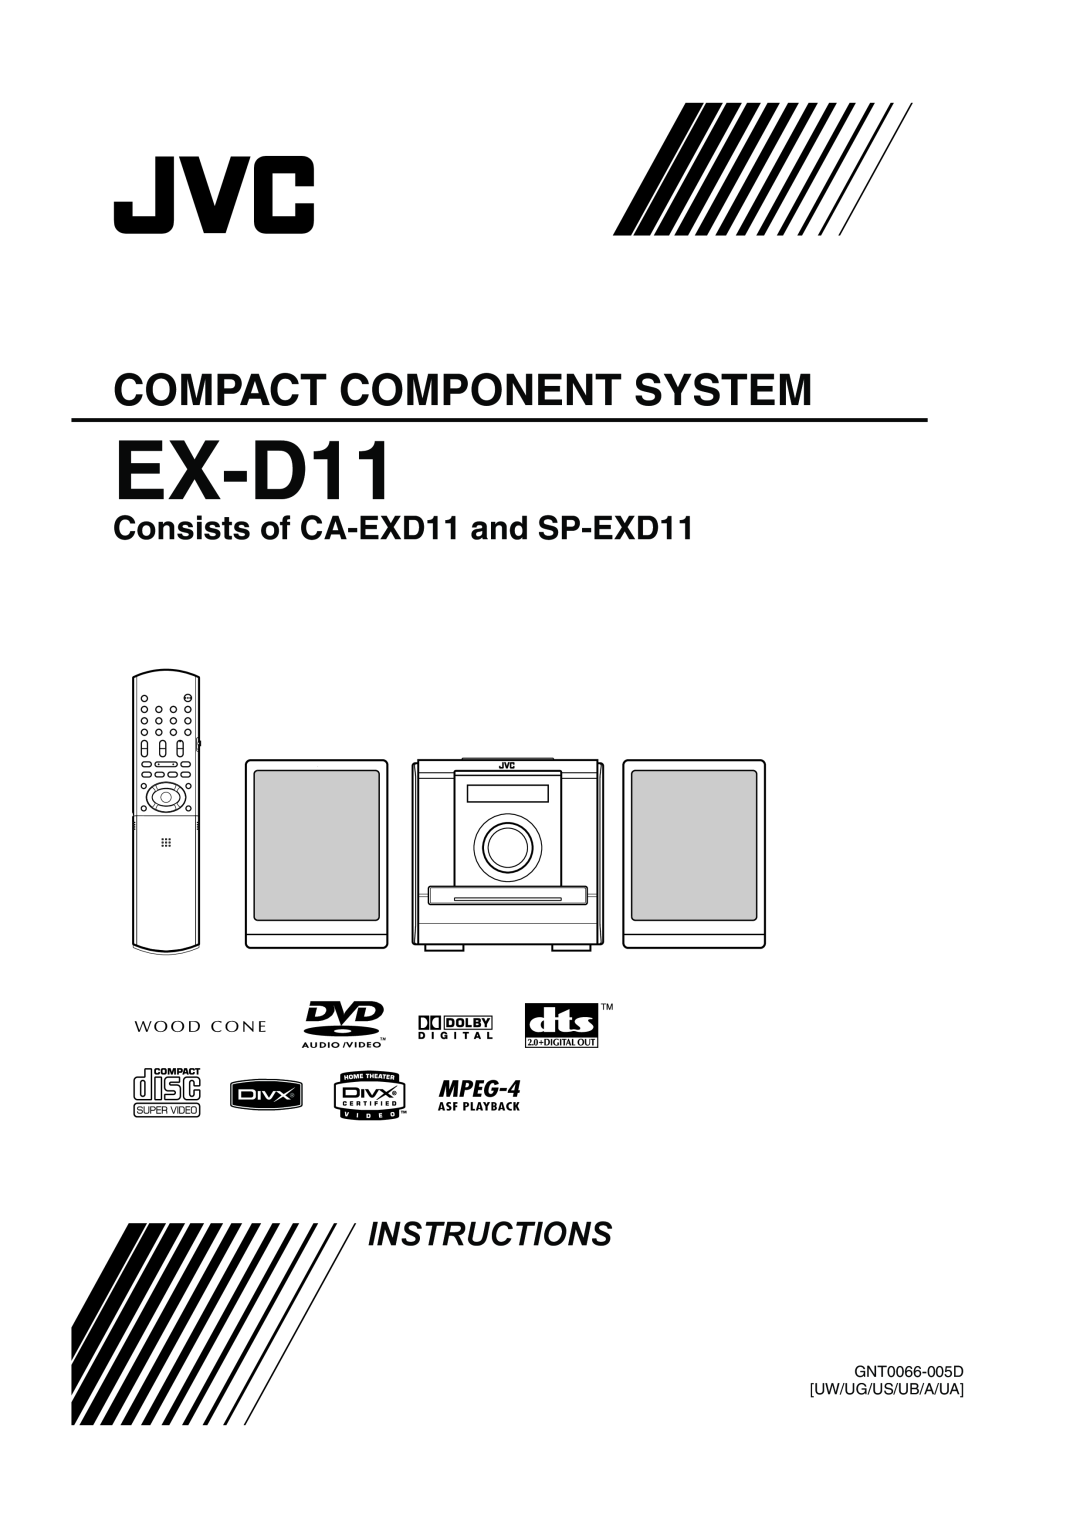 JVC GNT0066-001A manual EX-D11, Compact Component System, Consists of CA-EXD11and SP-EXD11, Instructions 